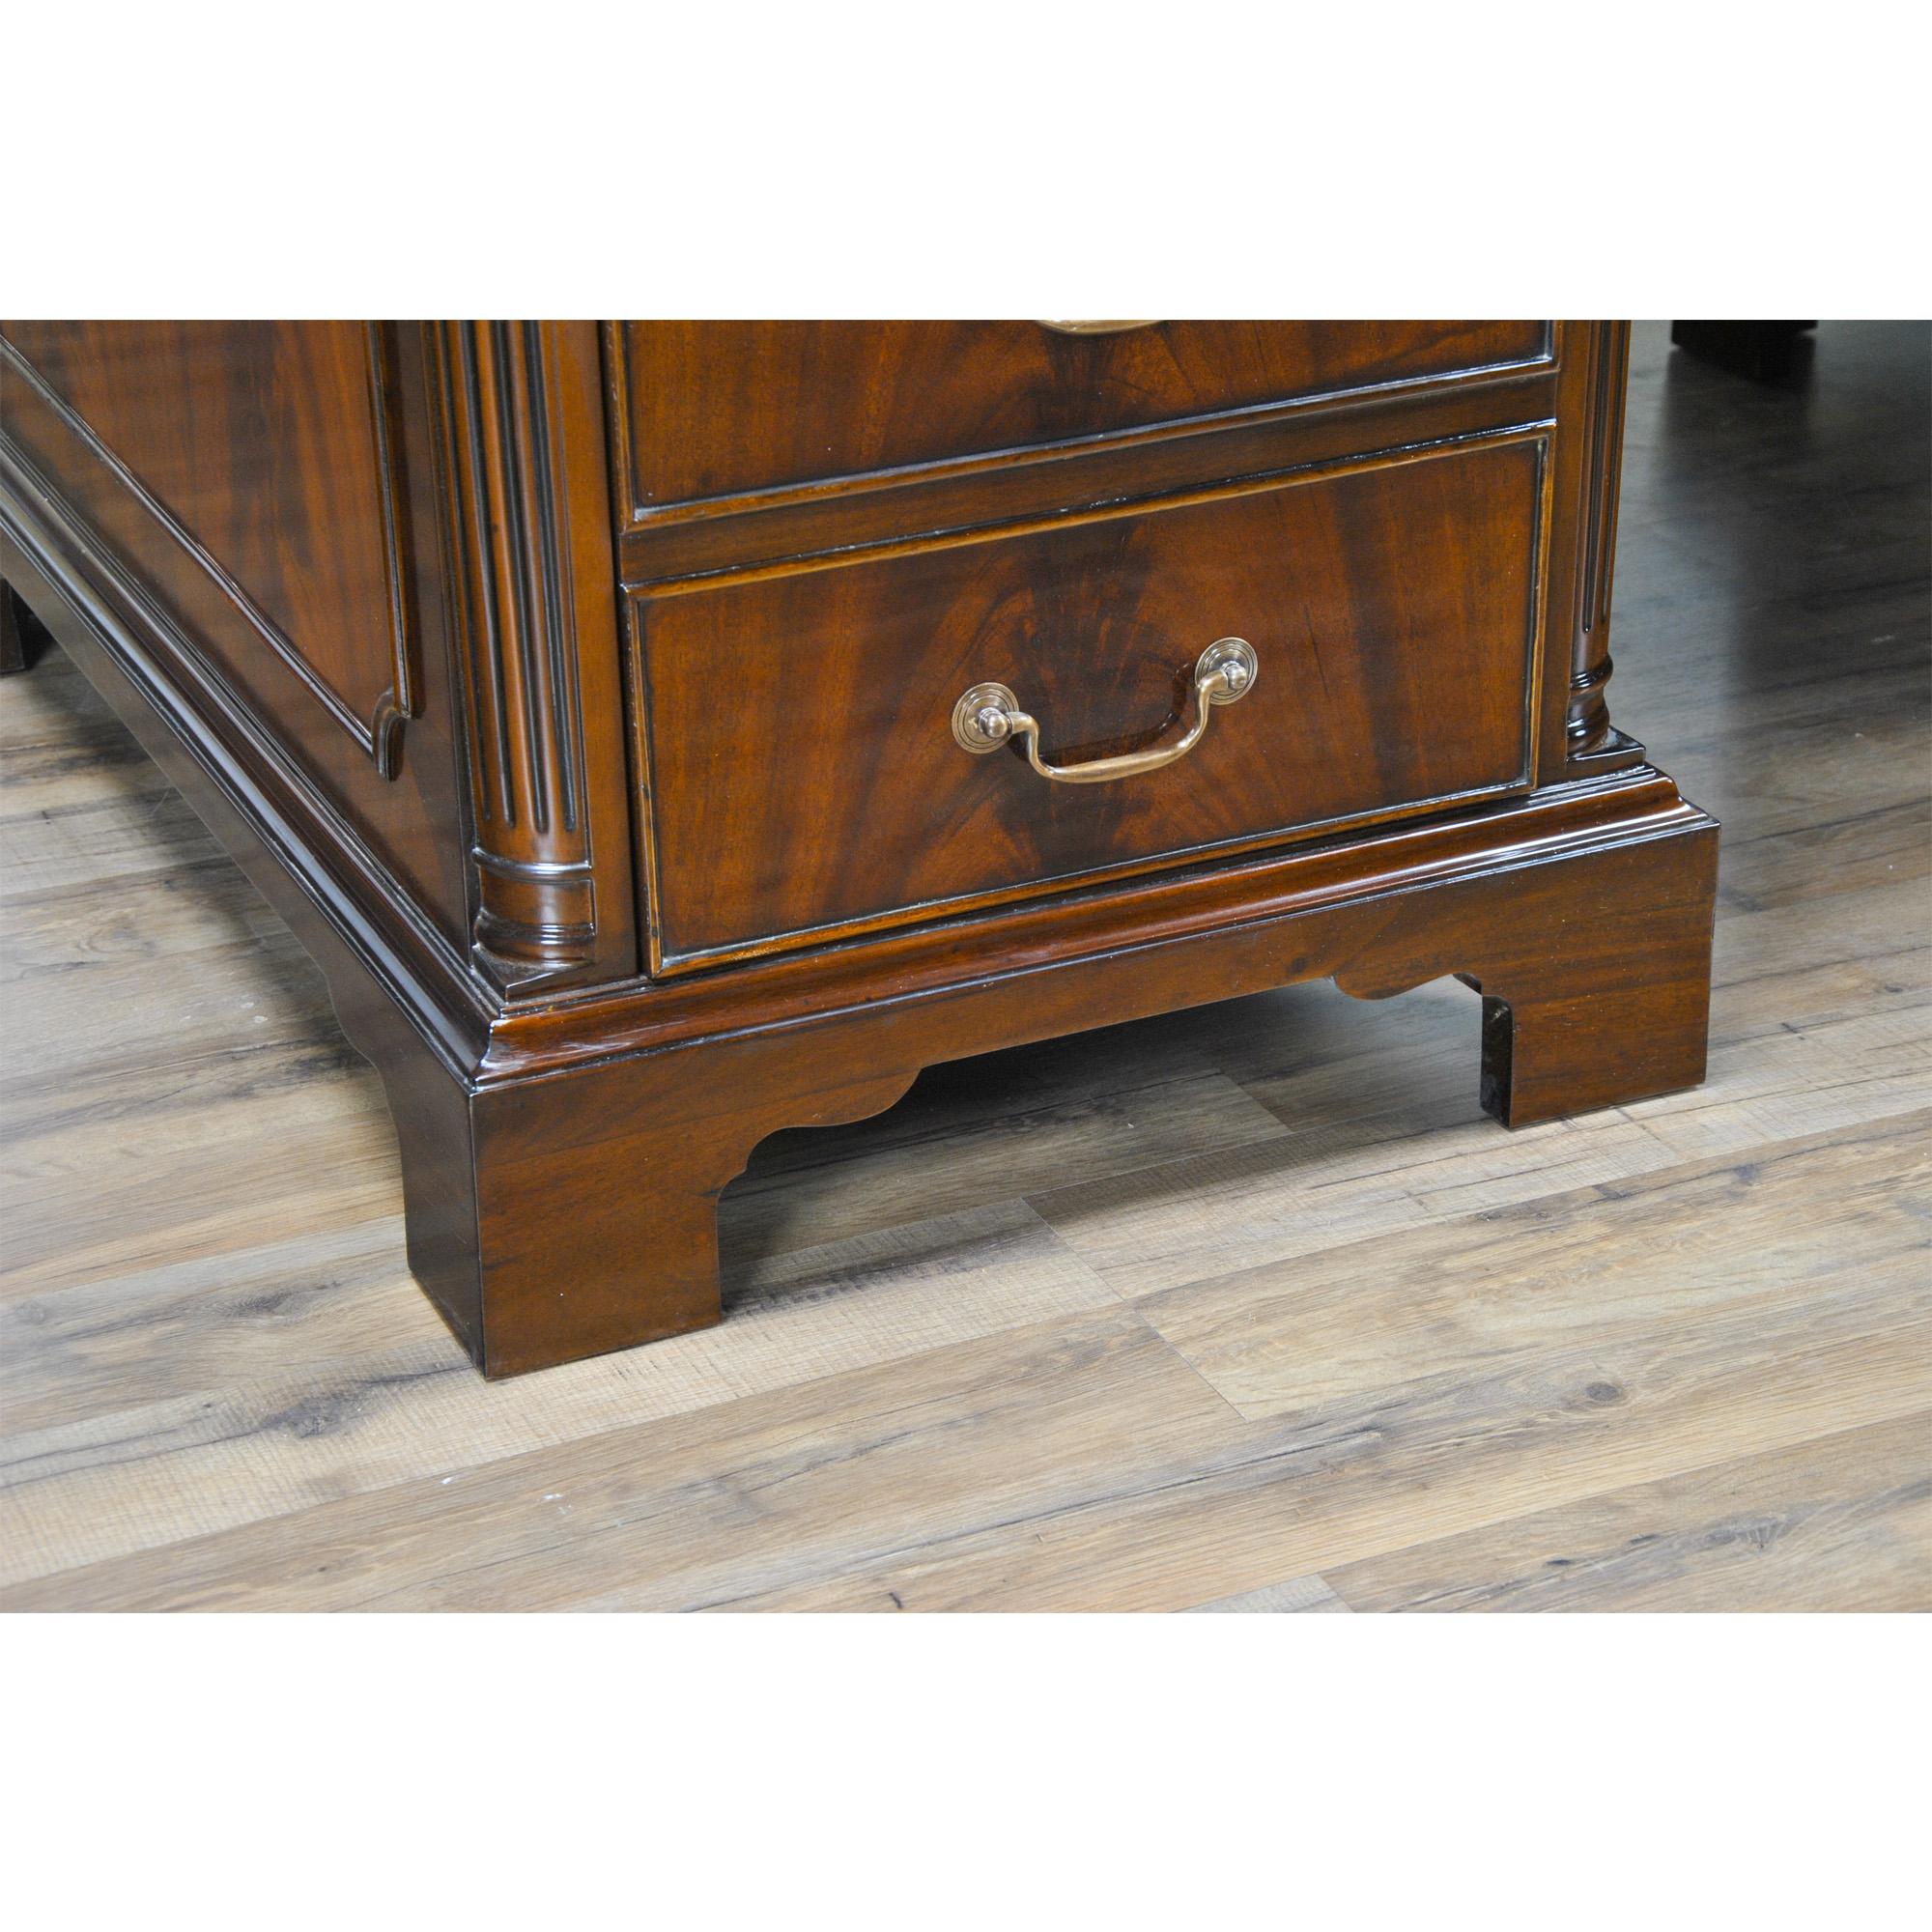 Mahogany Executive Desk In New Condition For Sale In Annville, PA